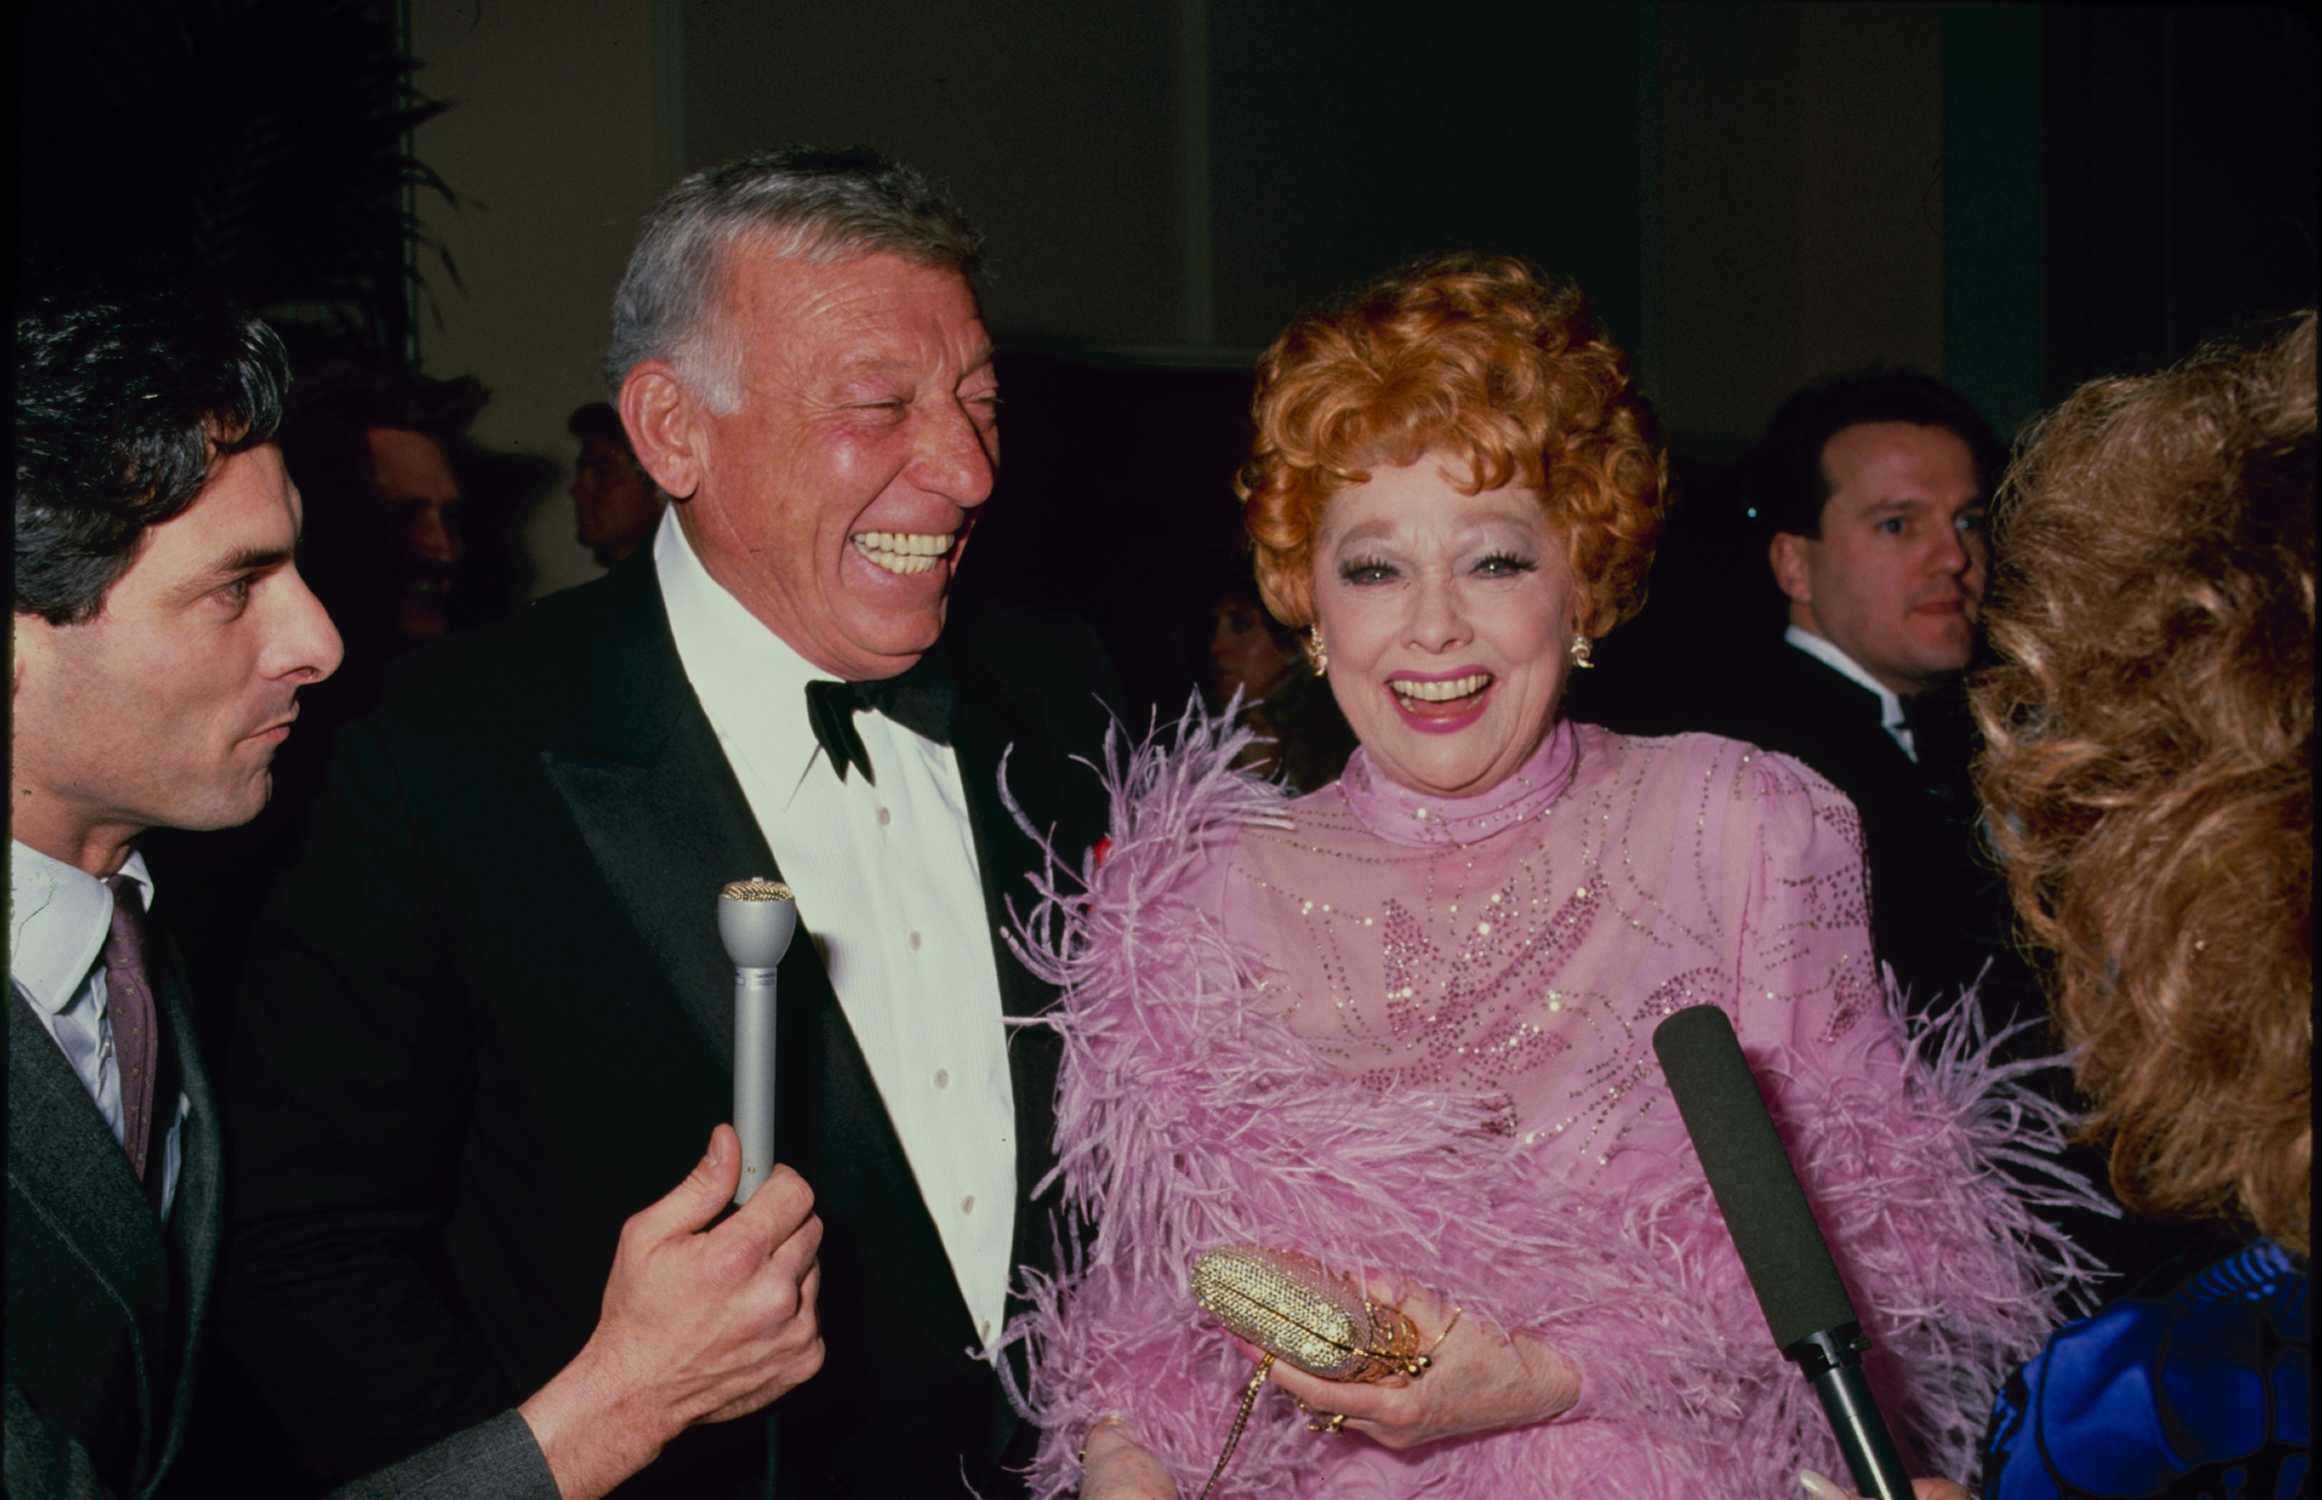 Lucille Ball with second husband, Gary Morton | The LIFE Picture Collection via Getty Image